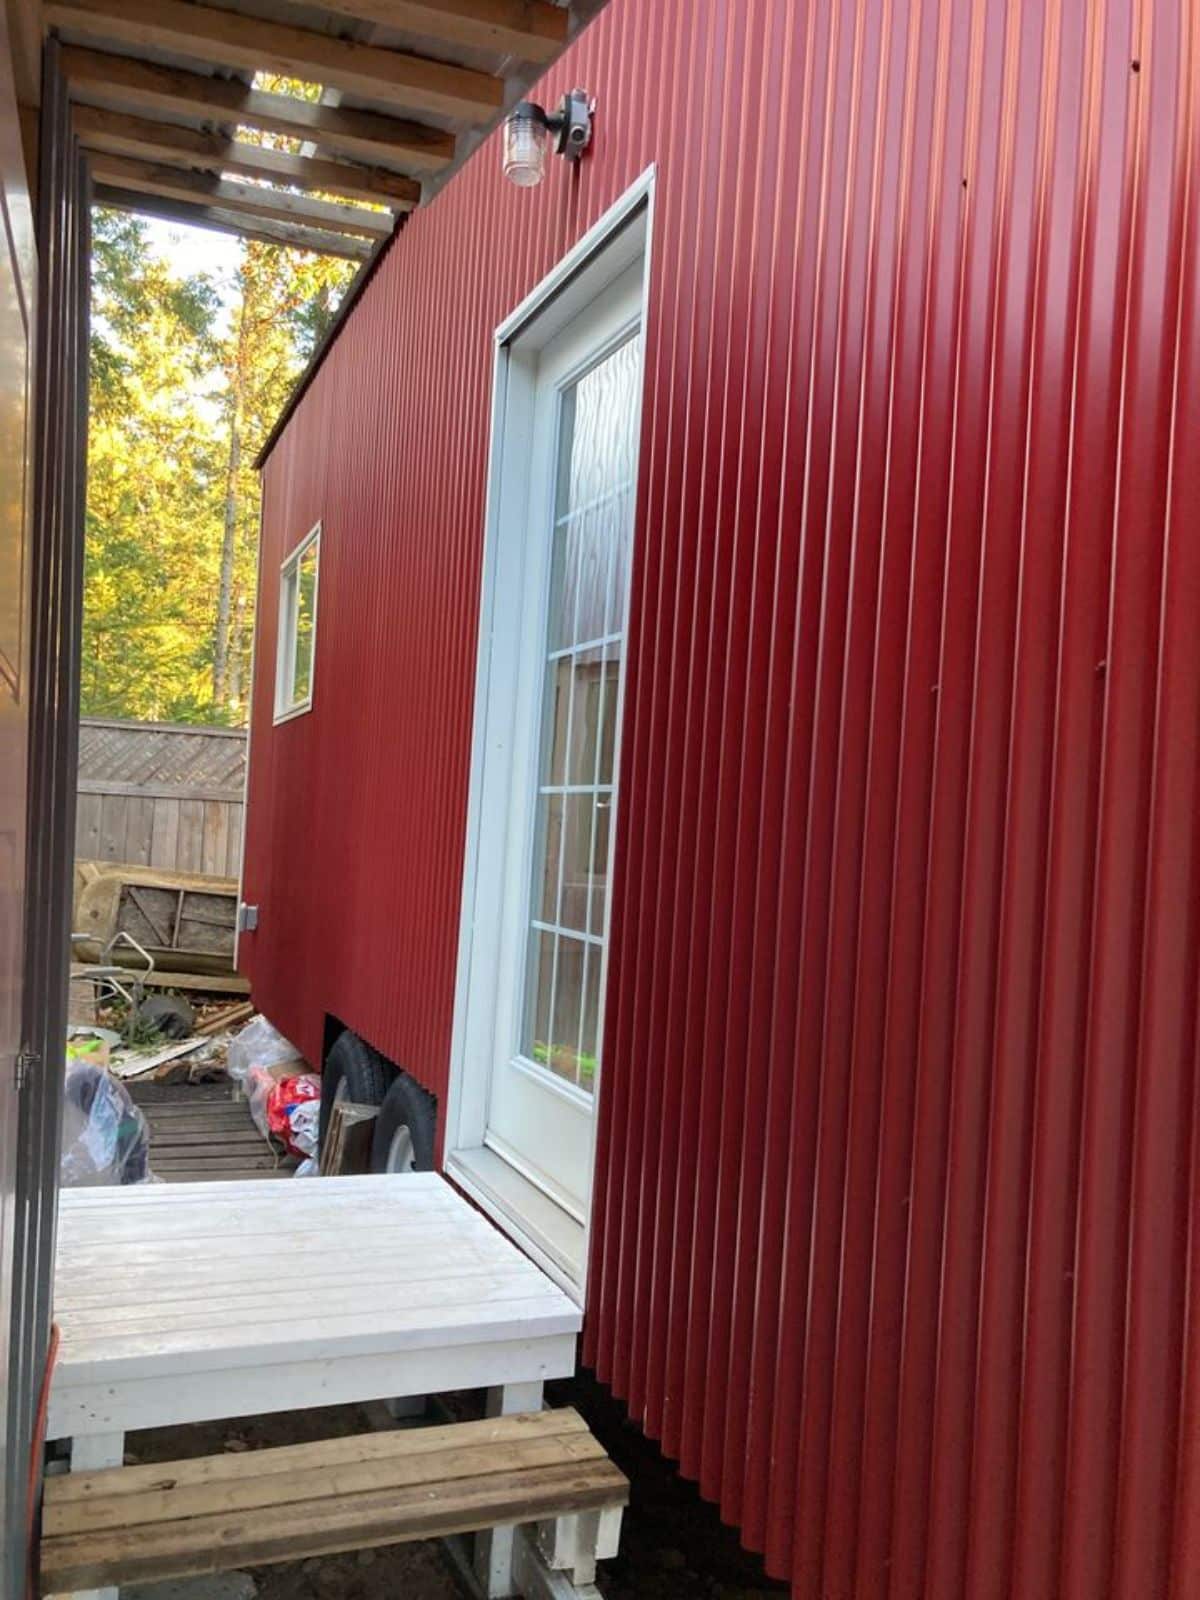 stunning red metal exterior of 26' insulated tiny home